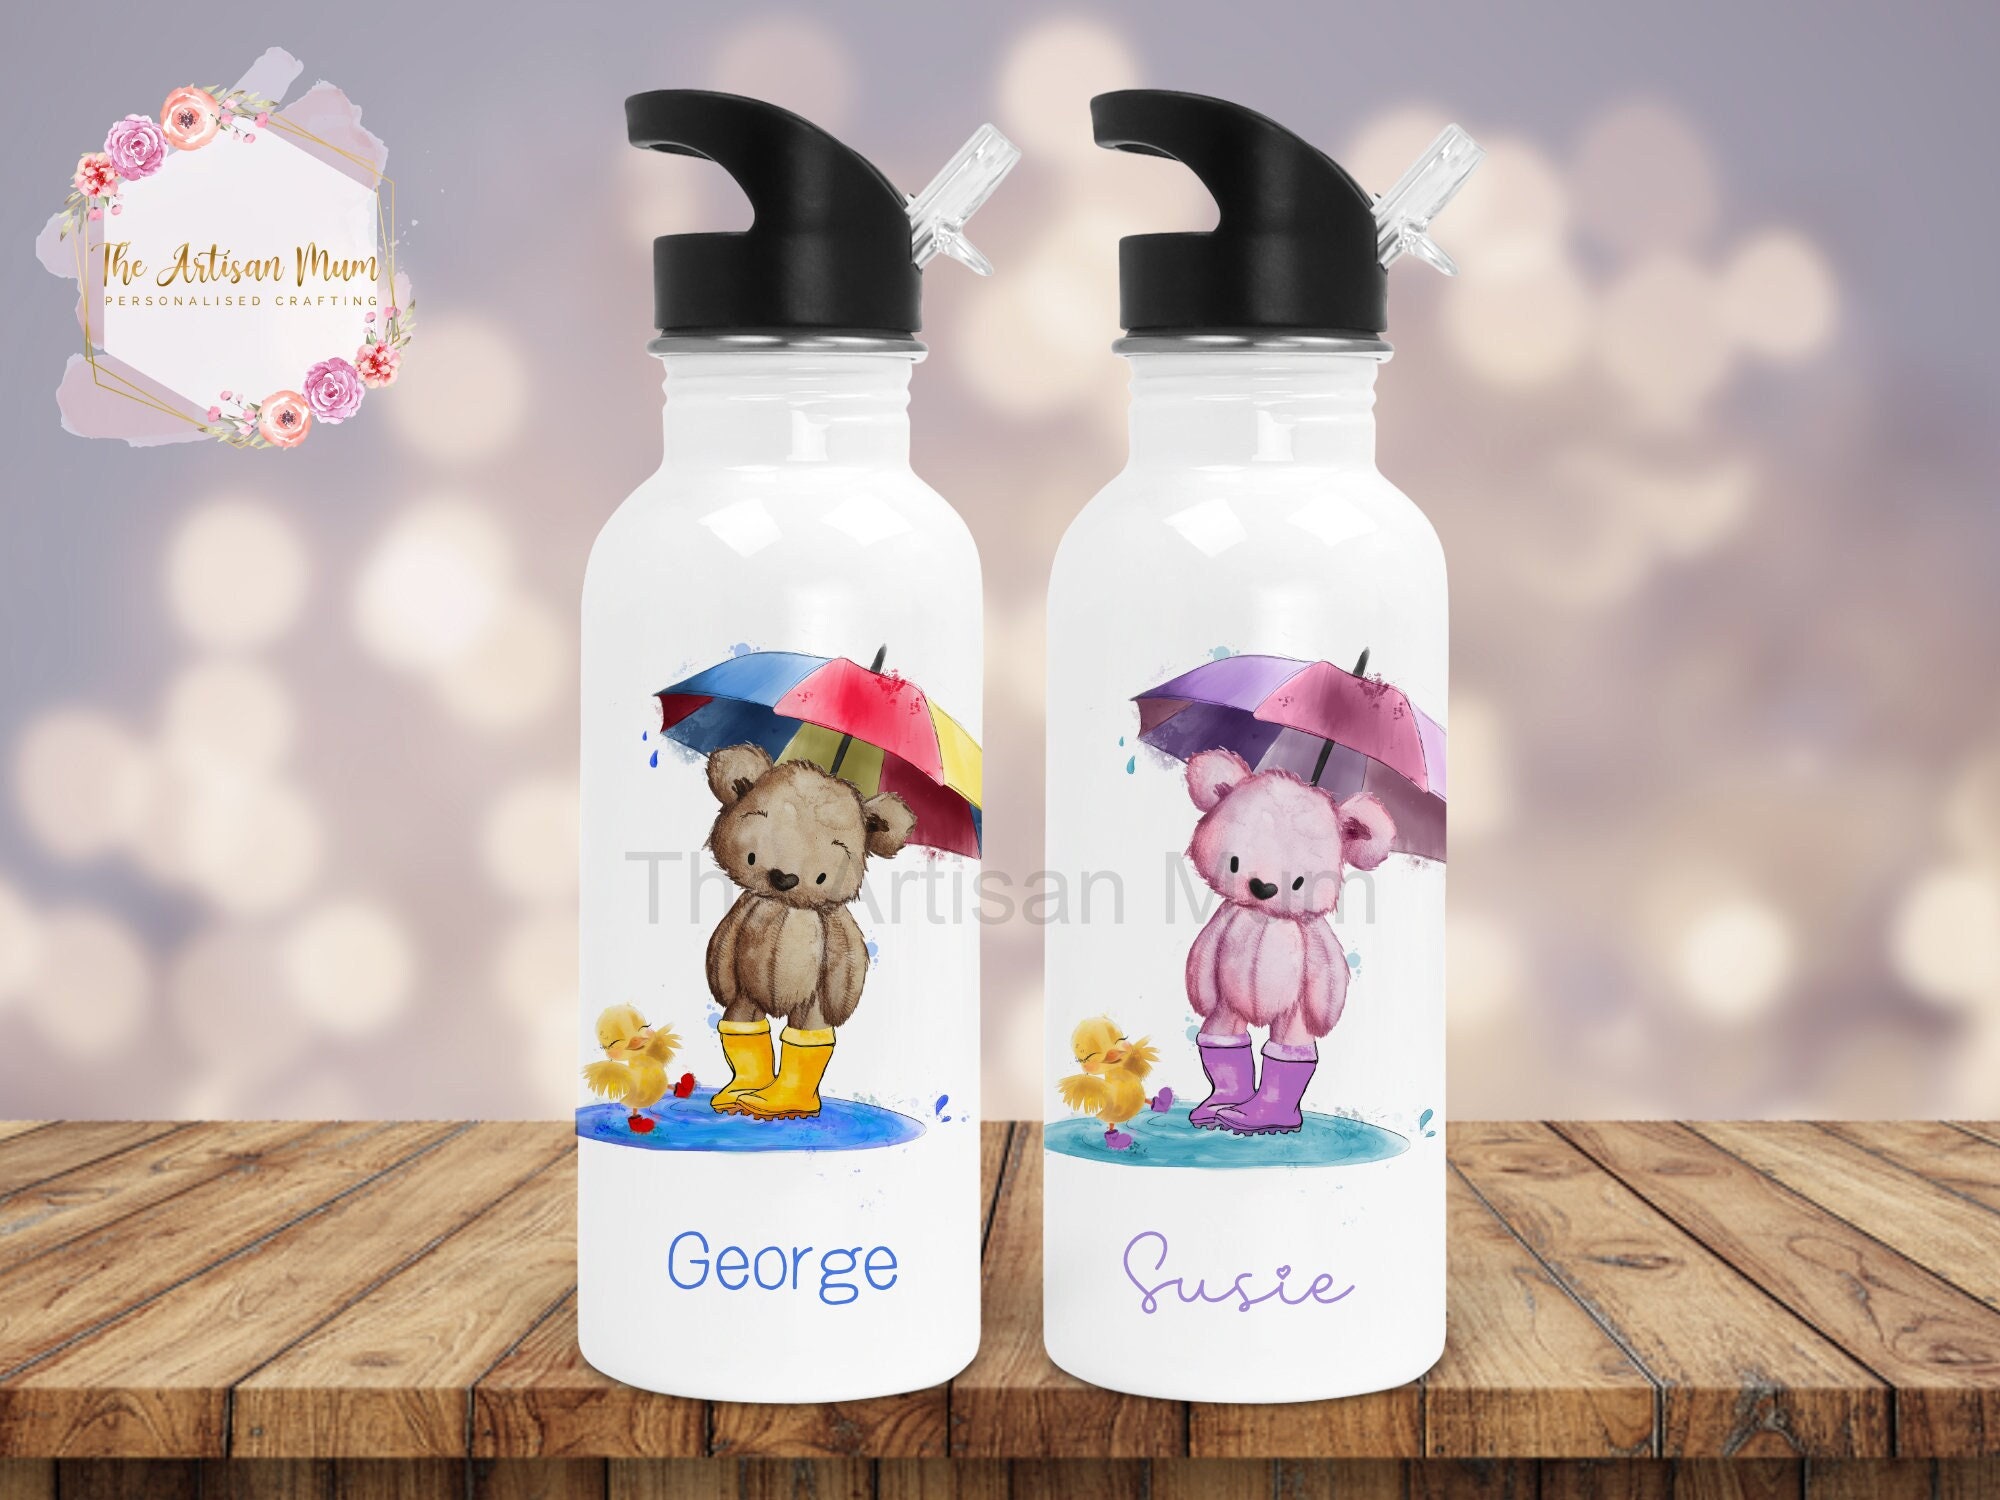 32OZ Bear Water Bottle For Girls Cute Cup With Straw Free Shipping